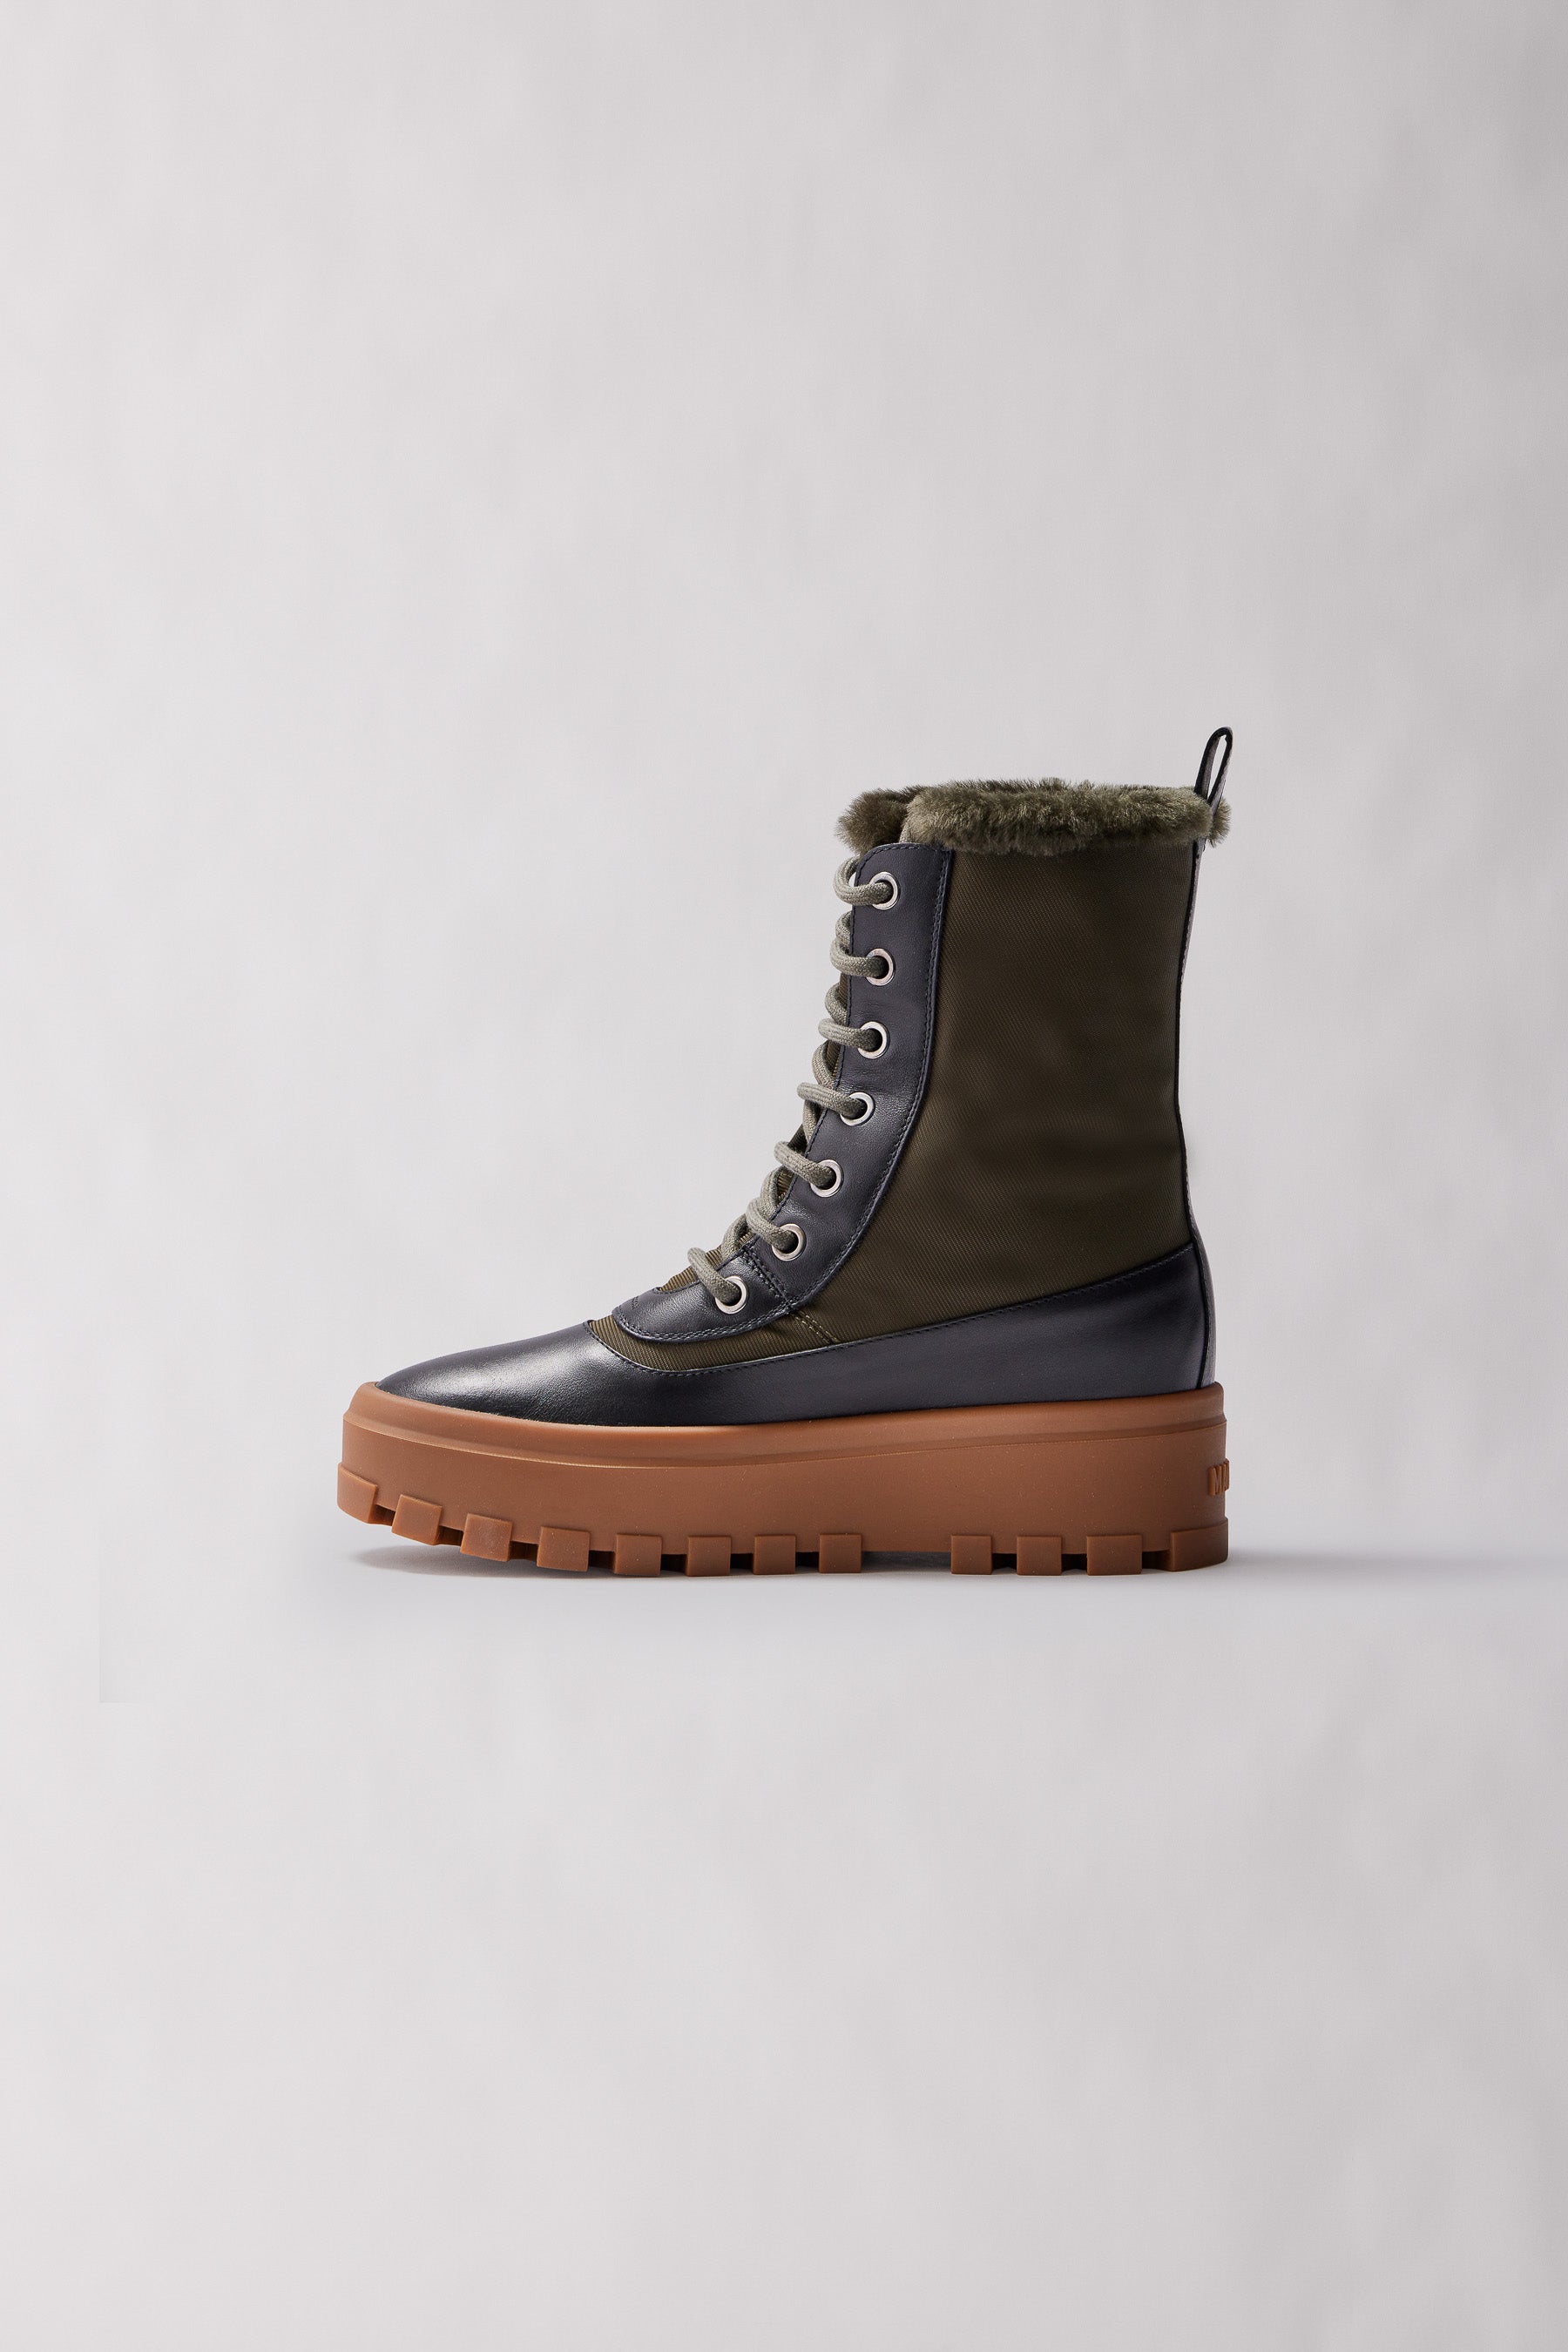 Hero, Shearling-lined winter boot for ladies | Mackage® US